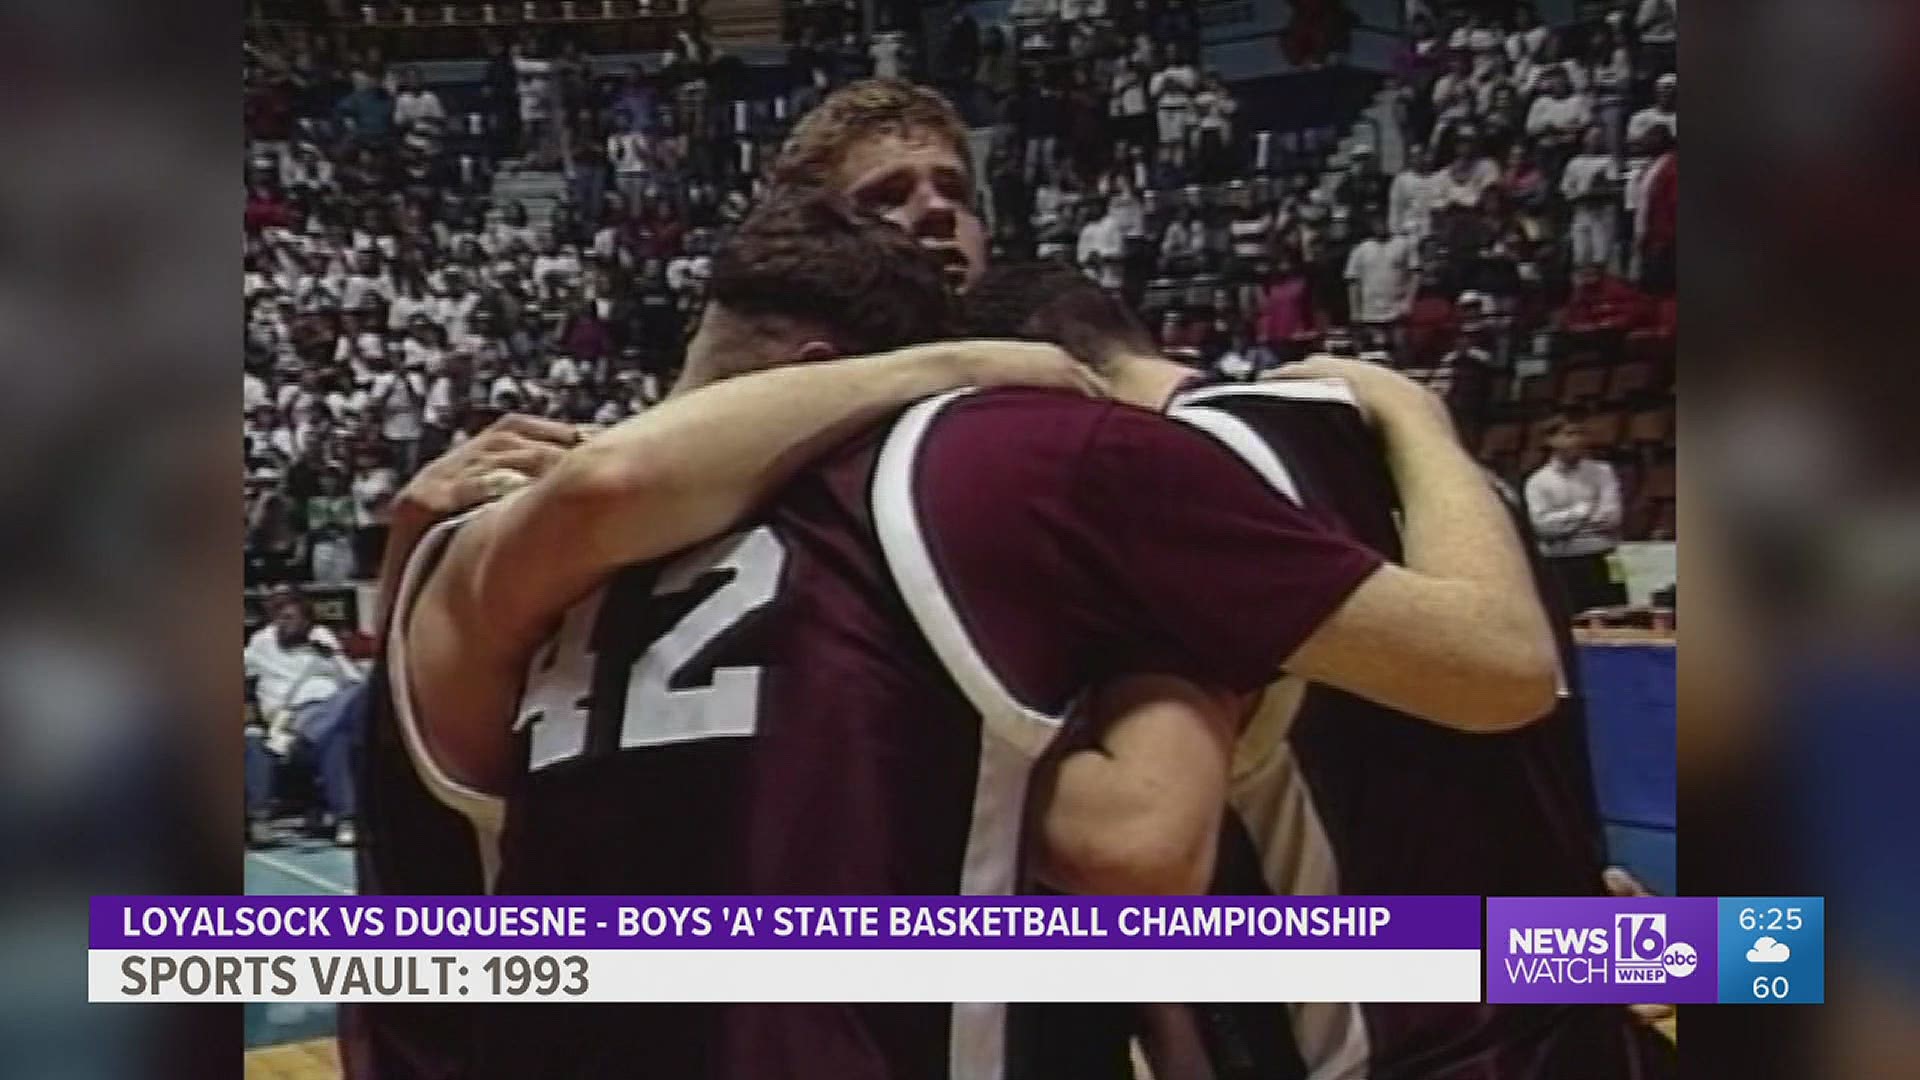 Sports Vault: Loyalsock made it's last trip to the HS State Basketball Championships in 1993 with a 70-60 loss to Duquesne in the 'A' Title game.